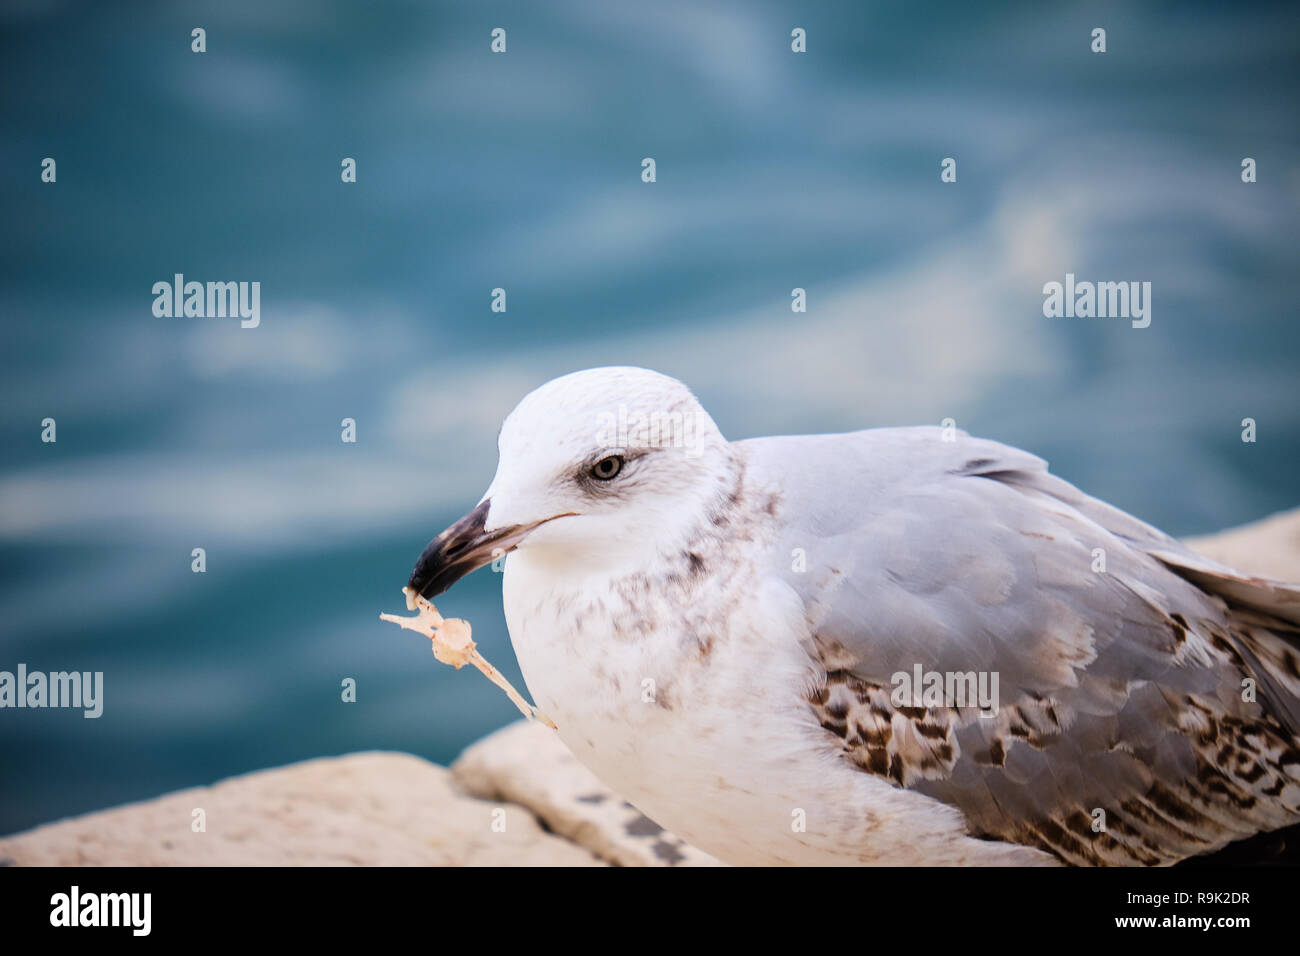 Seagull with bones from garbage in its beak. Illustration of the human impact on animals that now depend on these sources Stock Photo